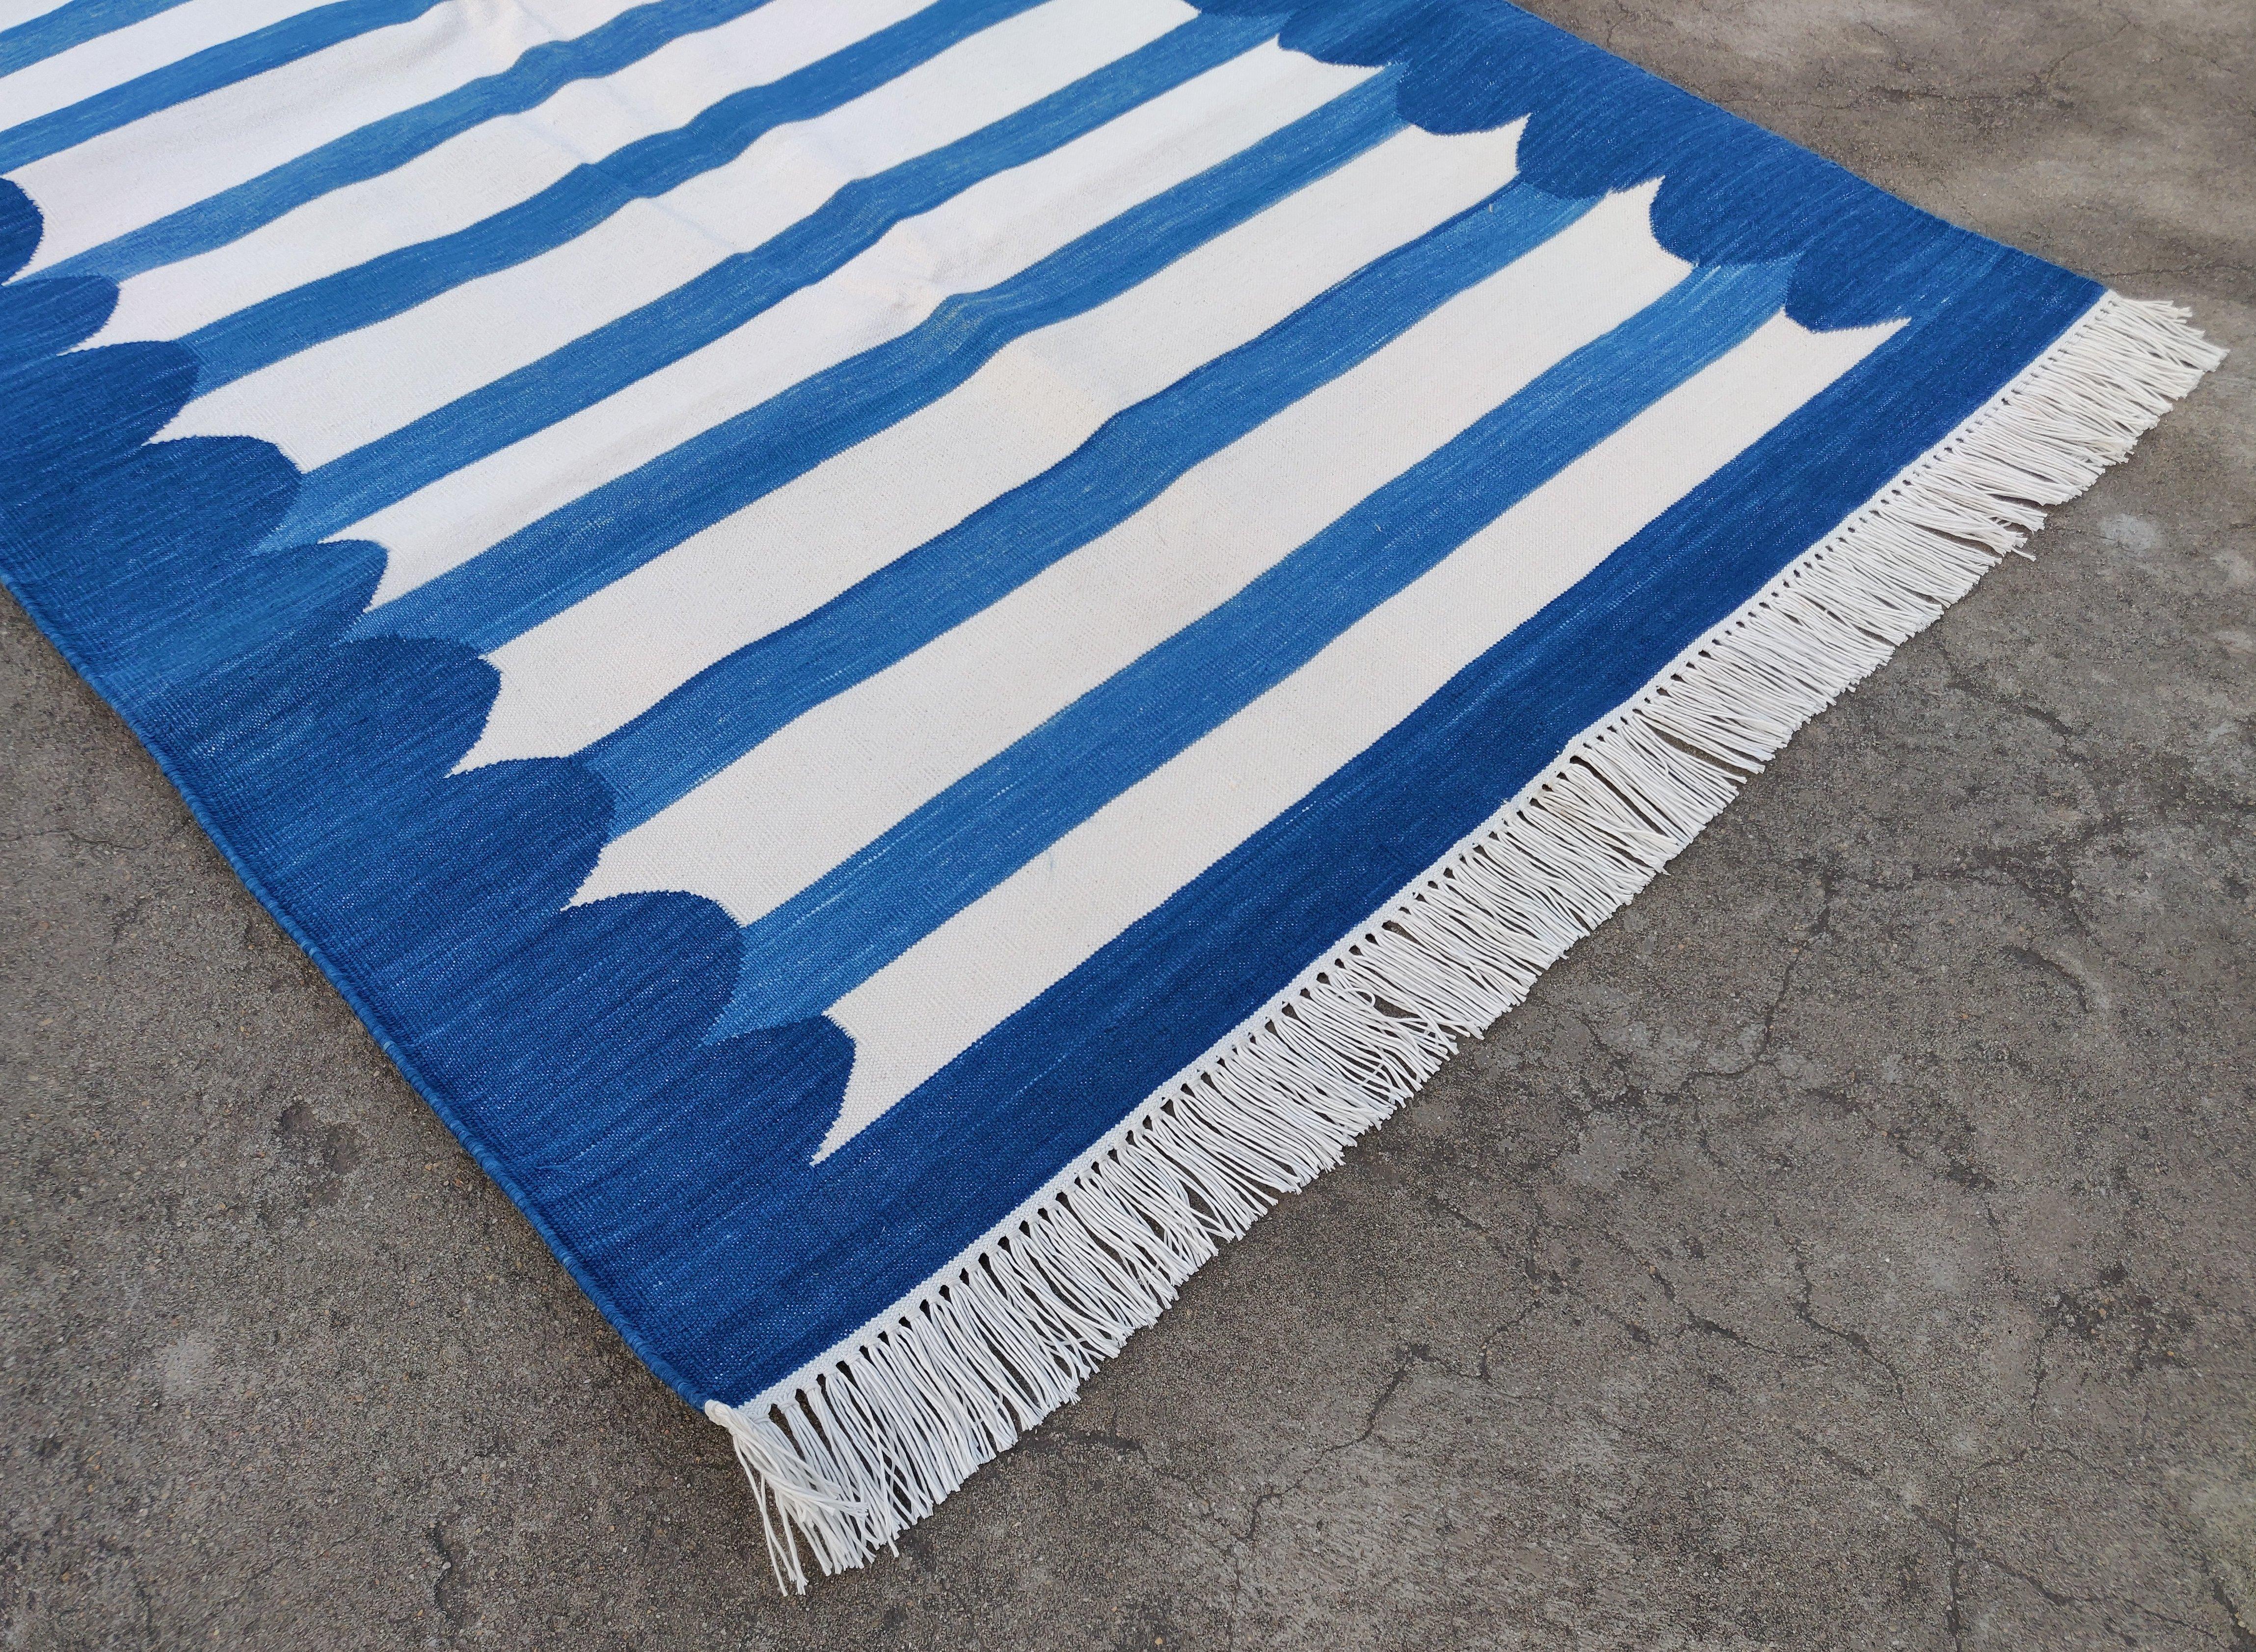 Cotton Natural Vegetable Dyed, Blue And White Scalloped Striped Indian Dhurrie Runner-3'x12' (90x360cm)
These special flat-weave dhurries are hand-woven with 15 ply 100% cotton yarn. Due to the special manufacturing techniques used to create our